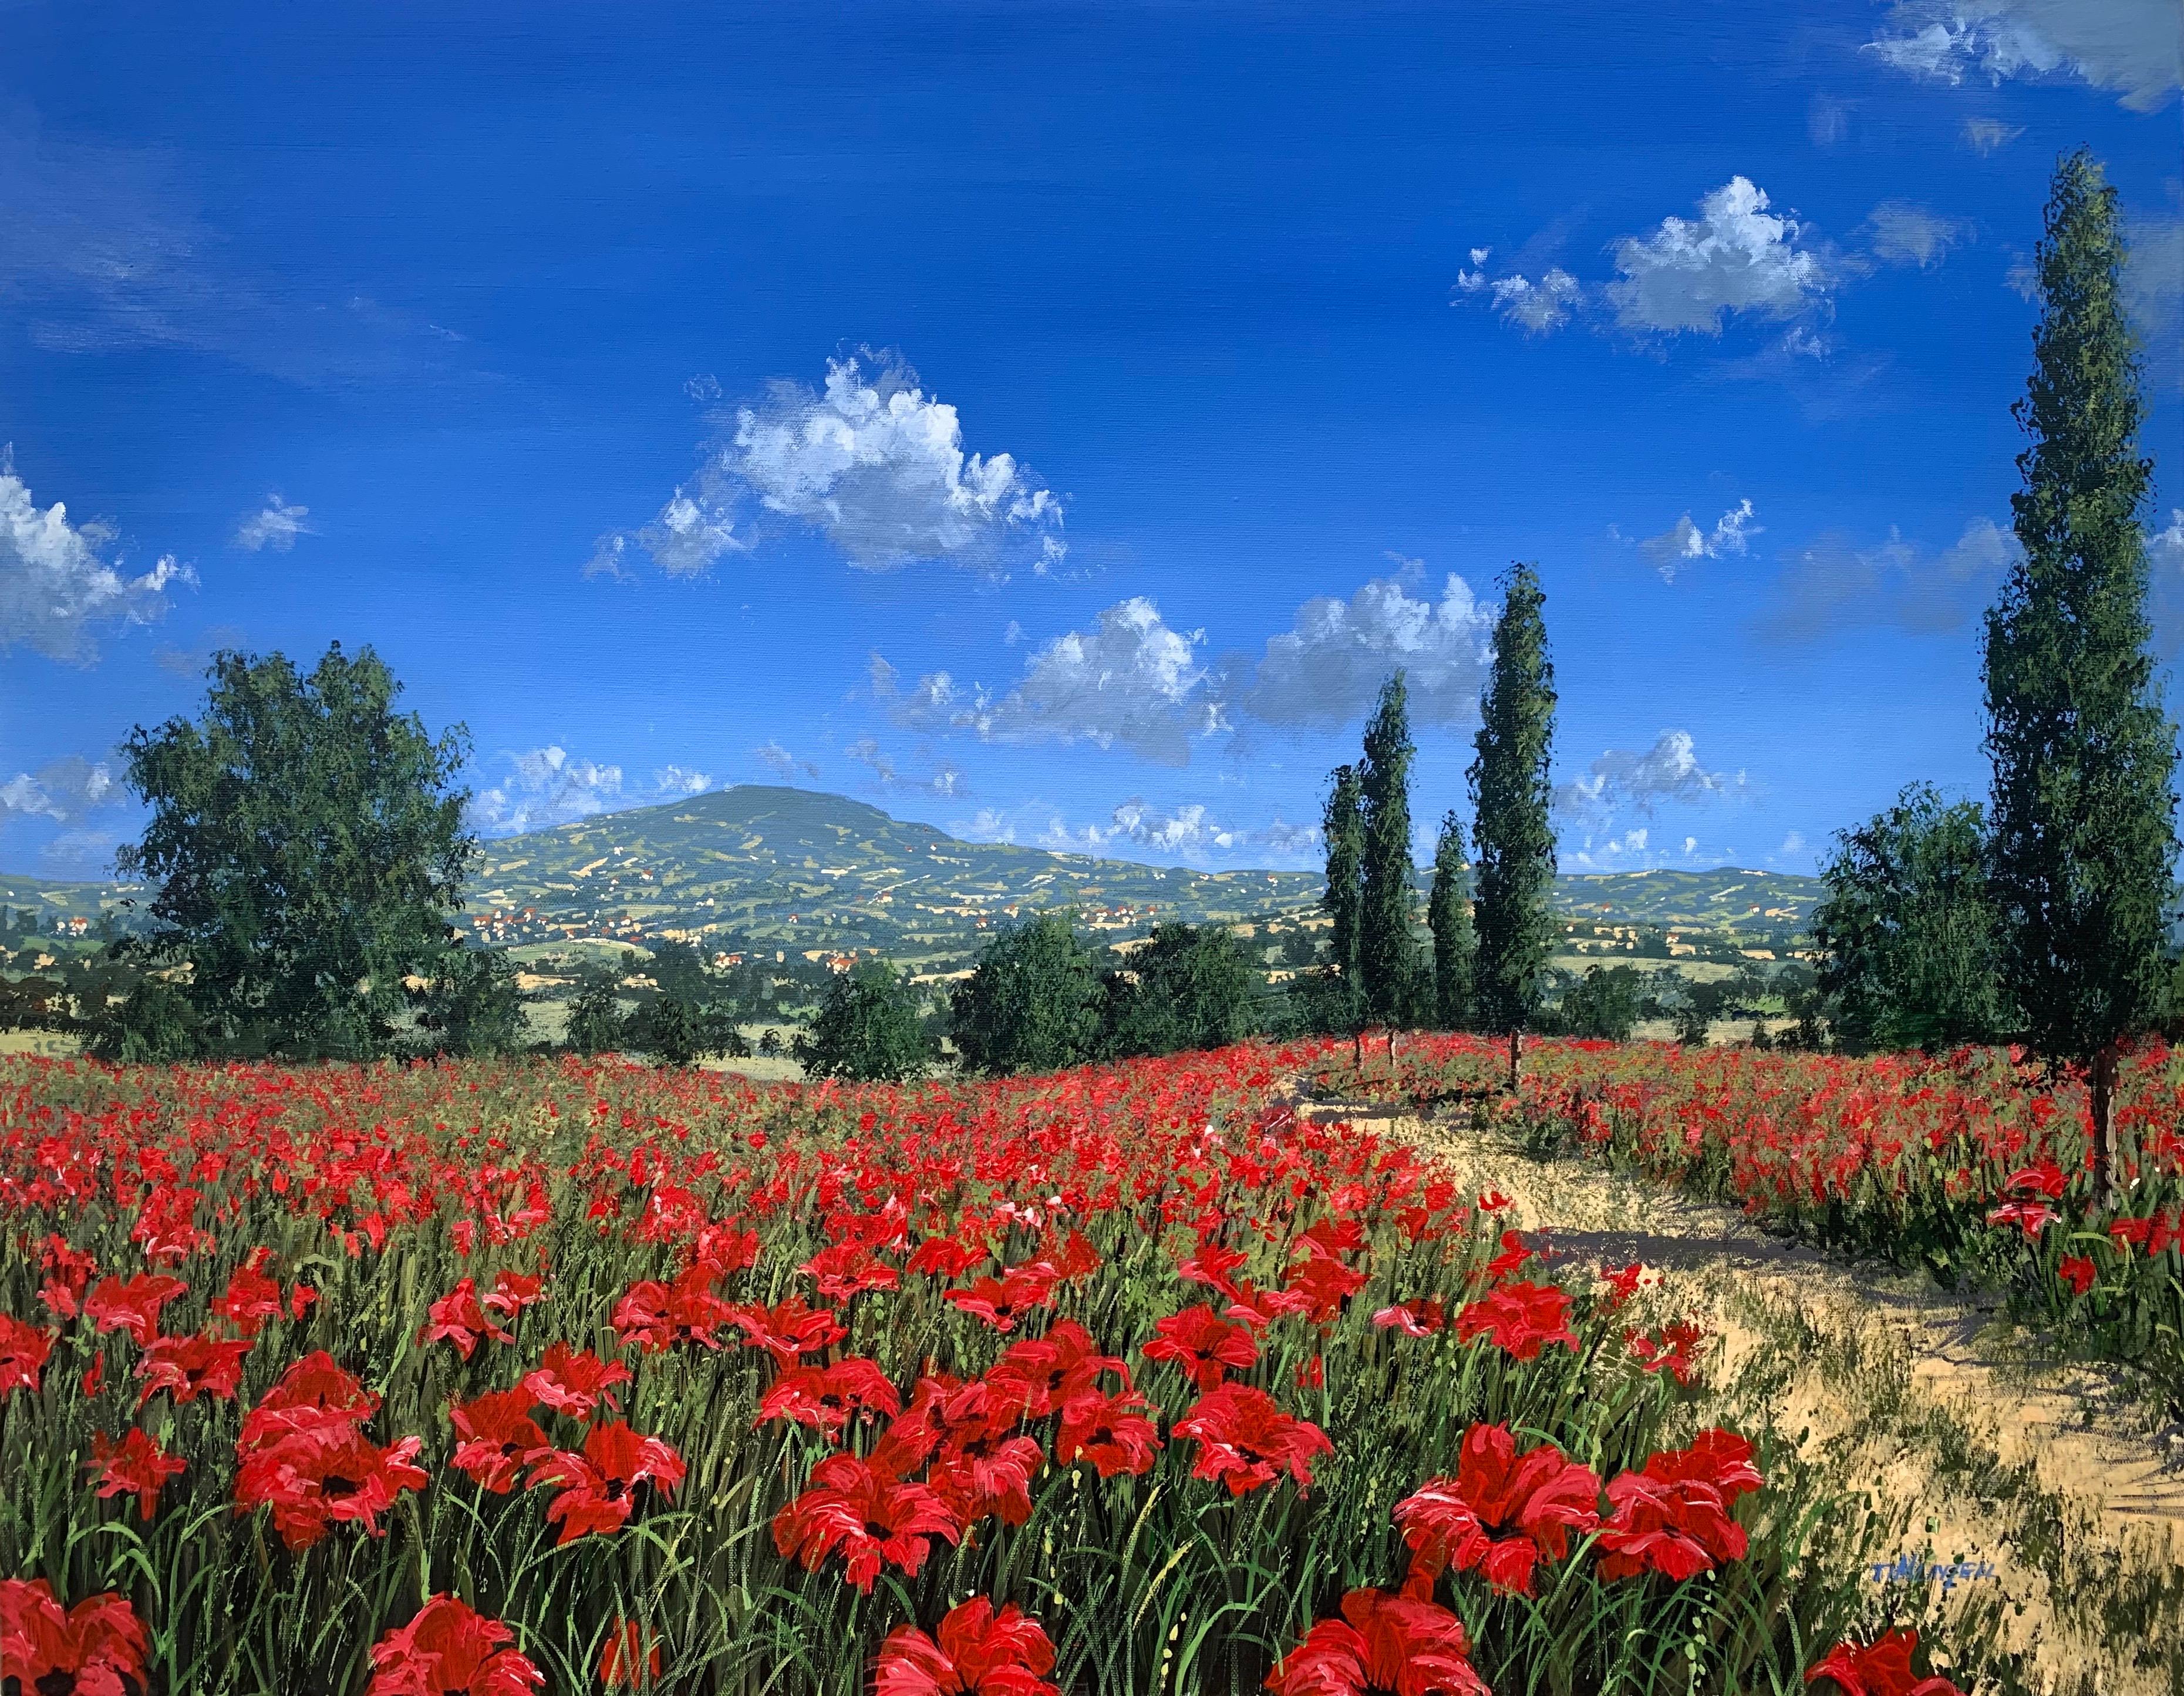 Tim Layzell Figurative Painting - Bright Red Poppy Field in the Sunshine in Europe by Contemporary British Artist